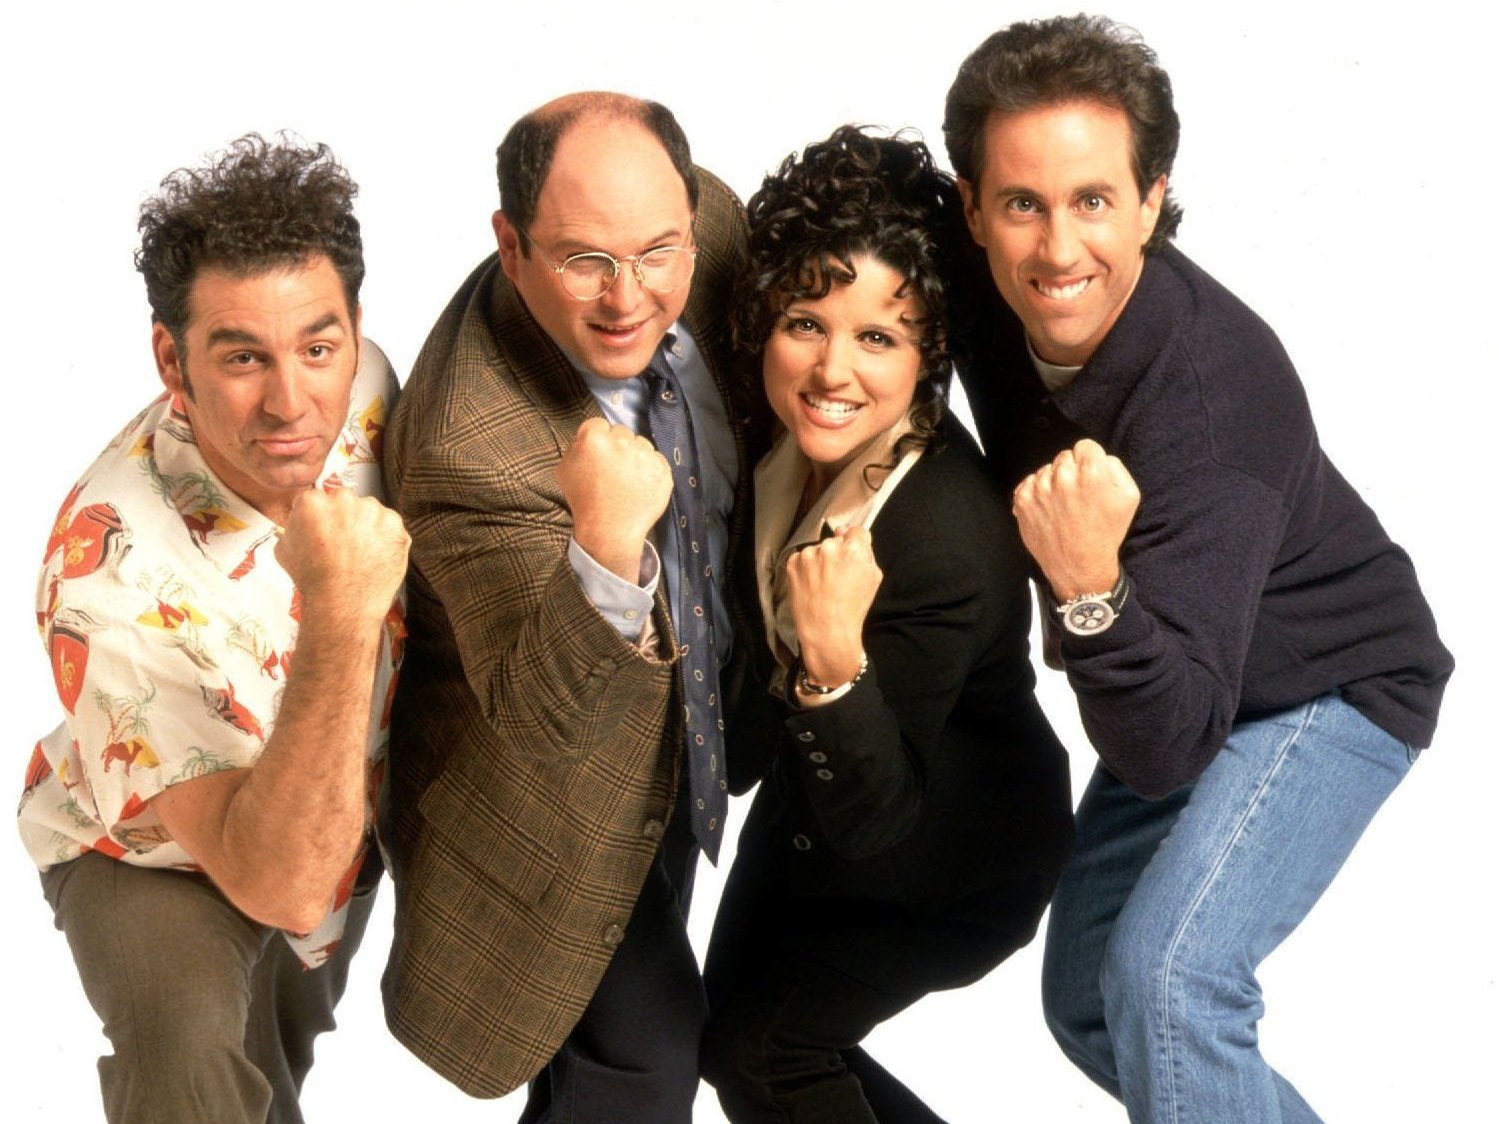 Seinfeld revolves around a neurotic stand-up comedian and his equally dysfu...